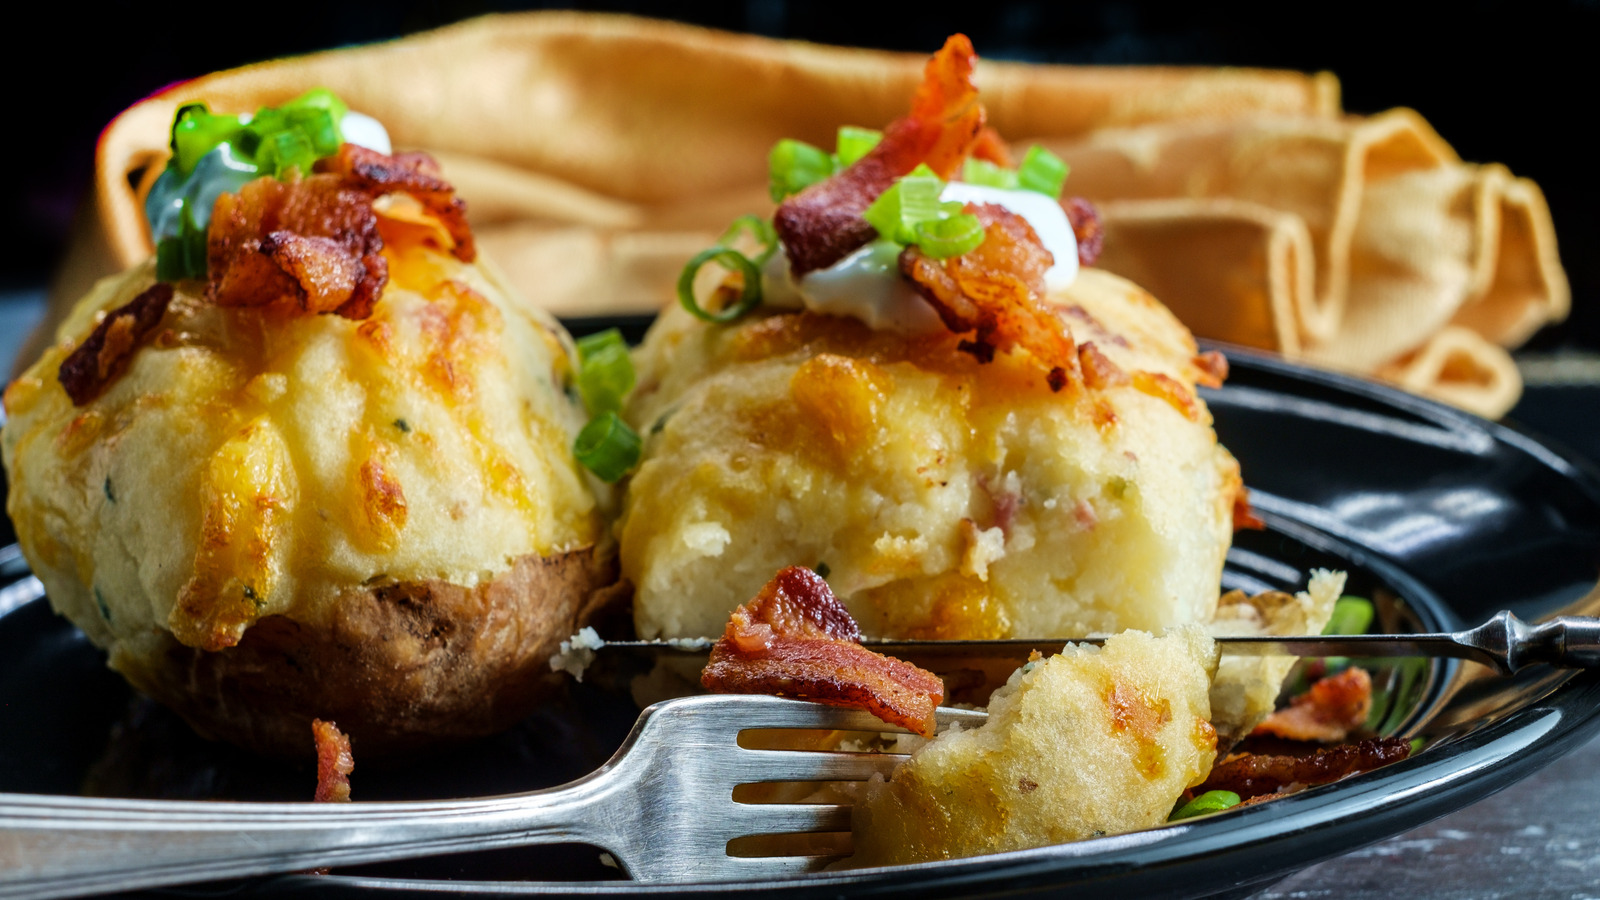 Loaded Smashed Potatoes with Bacon & Parmesan - The Original Dish